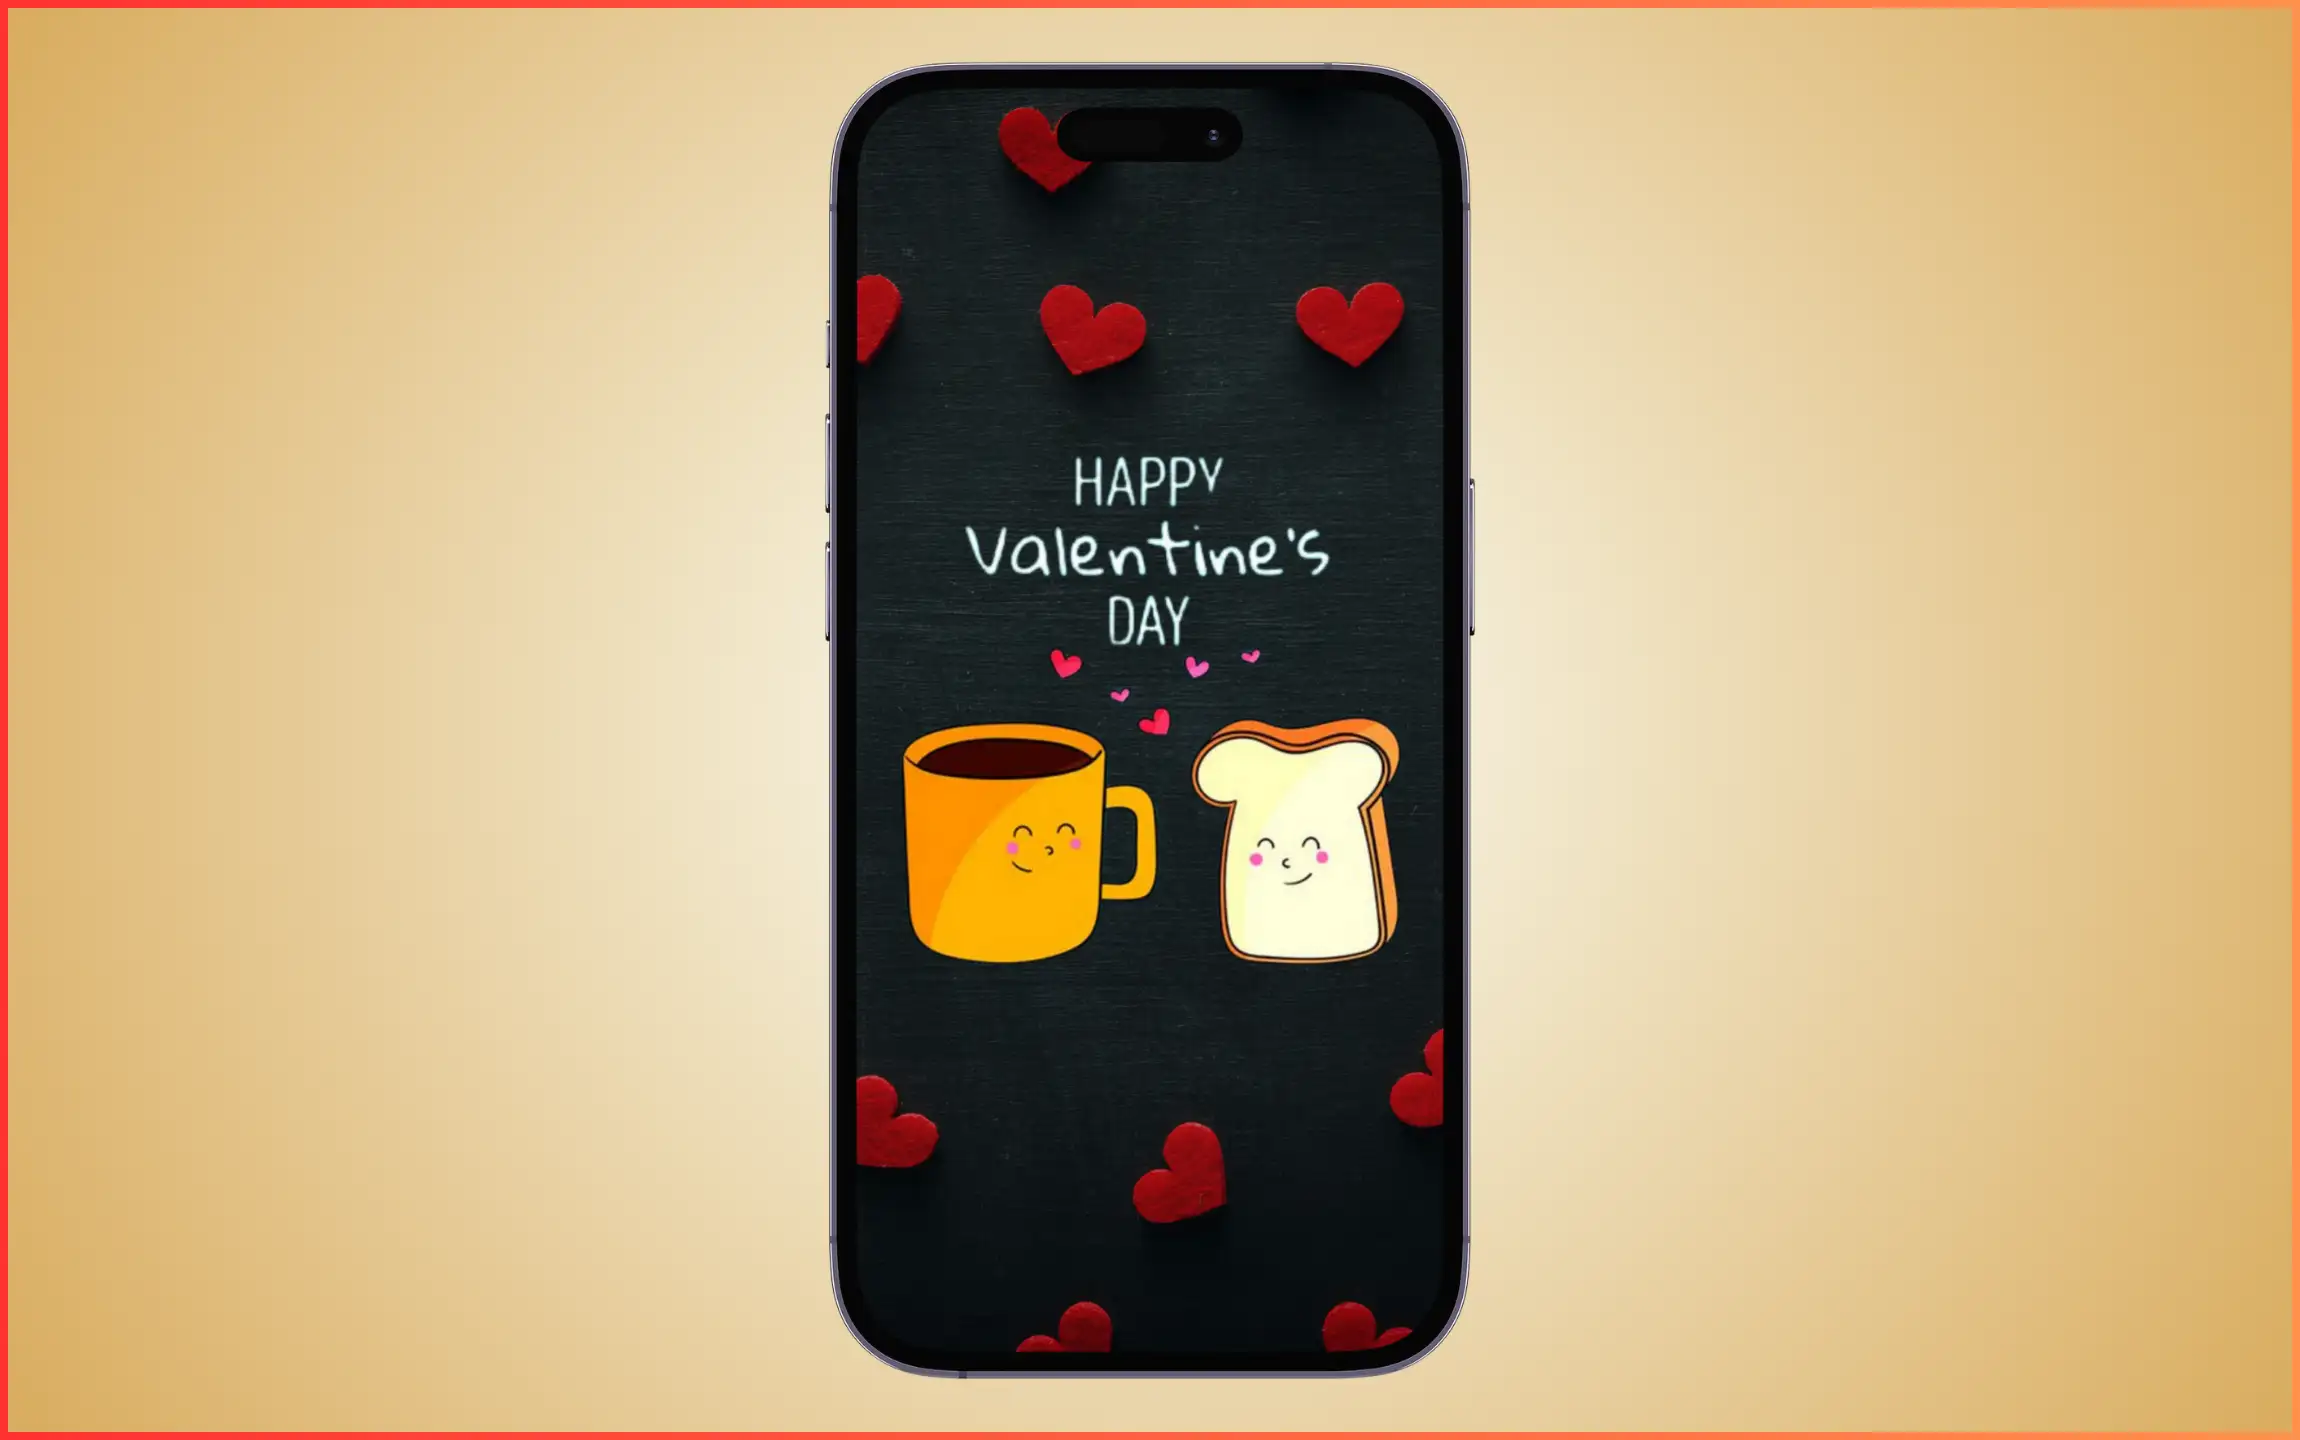 Happy valentines Day images for iPhone